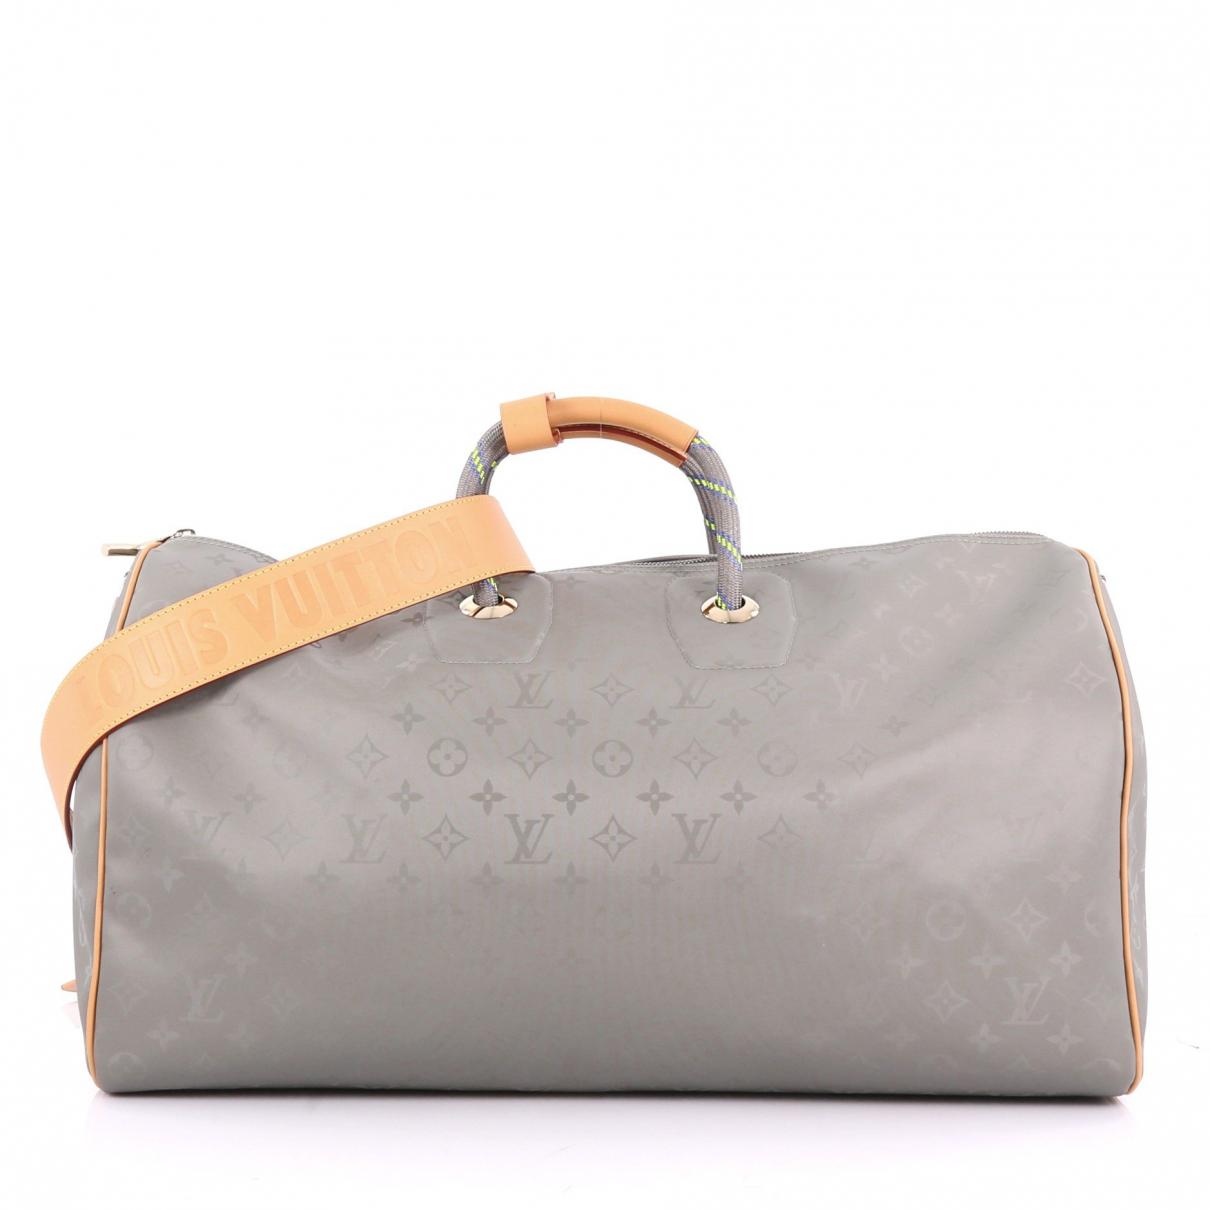 Louis Vuitton Keepall Cloth Travel Bag in Grey (Gray) - Lyst